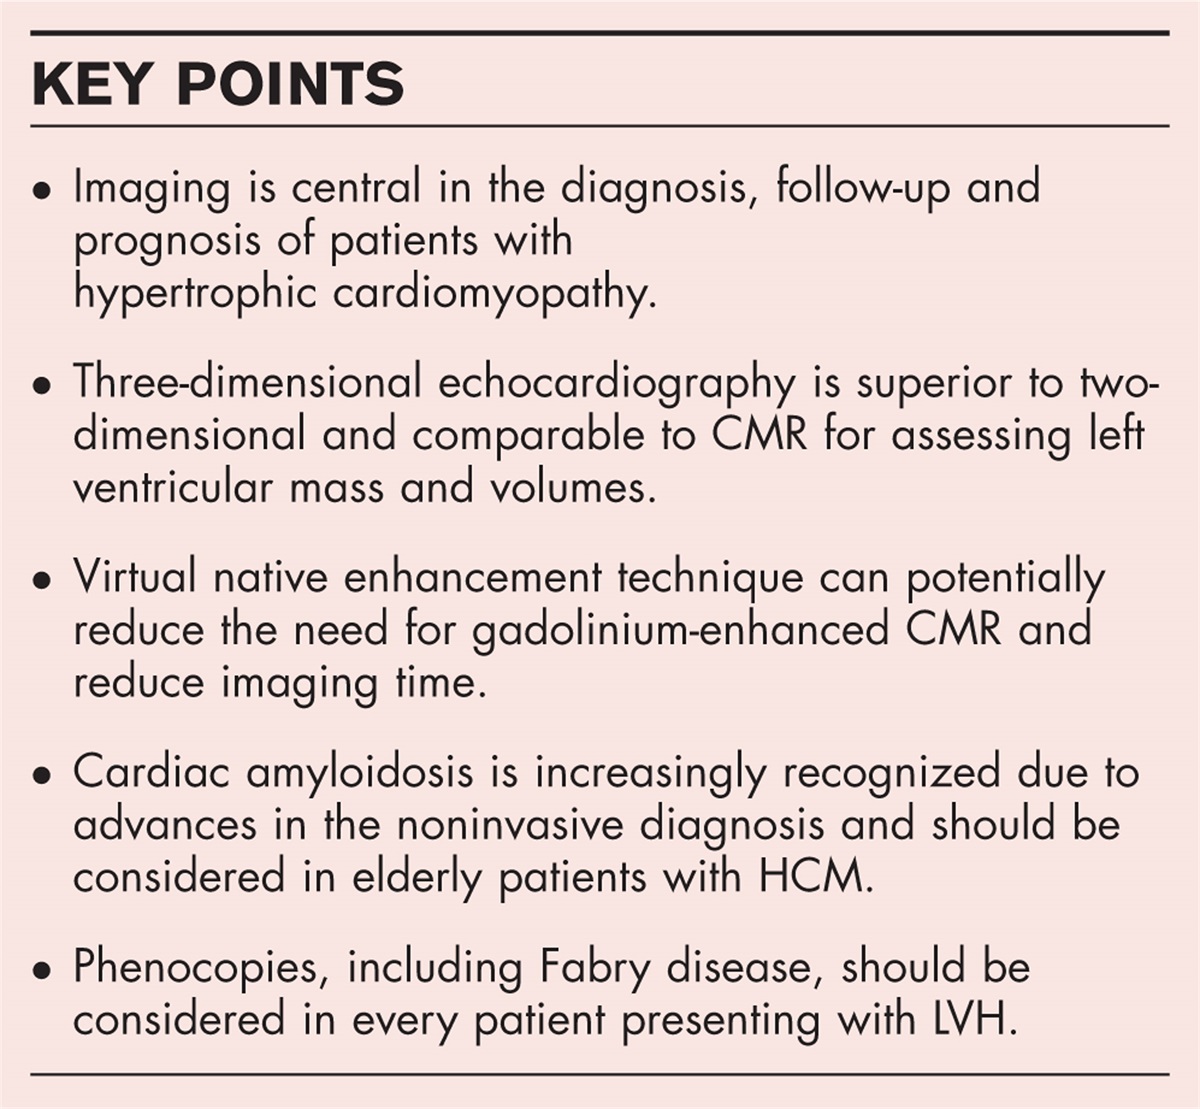 Imaging cardiac hypertrophy in hypertrophic cardiomyopathy and its differential diagnosis